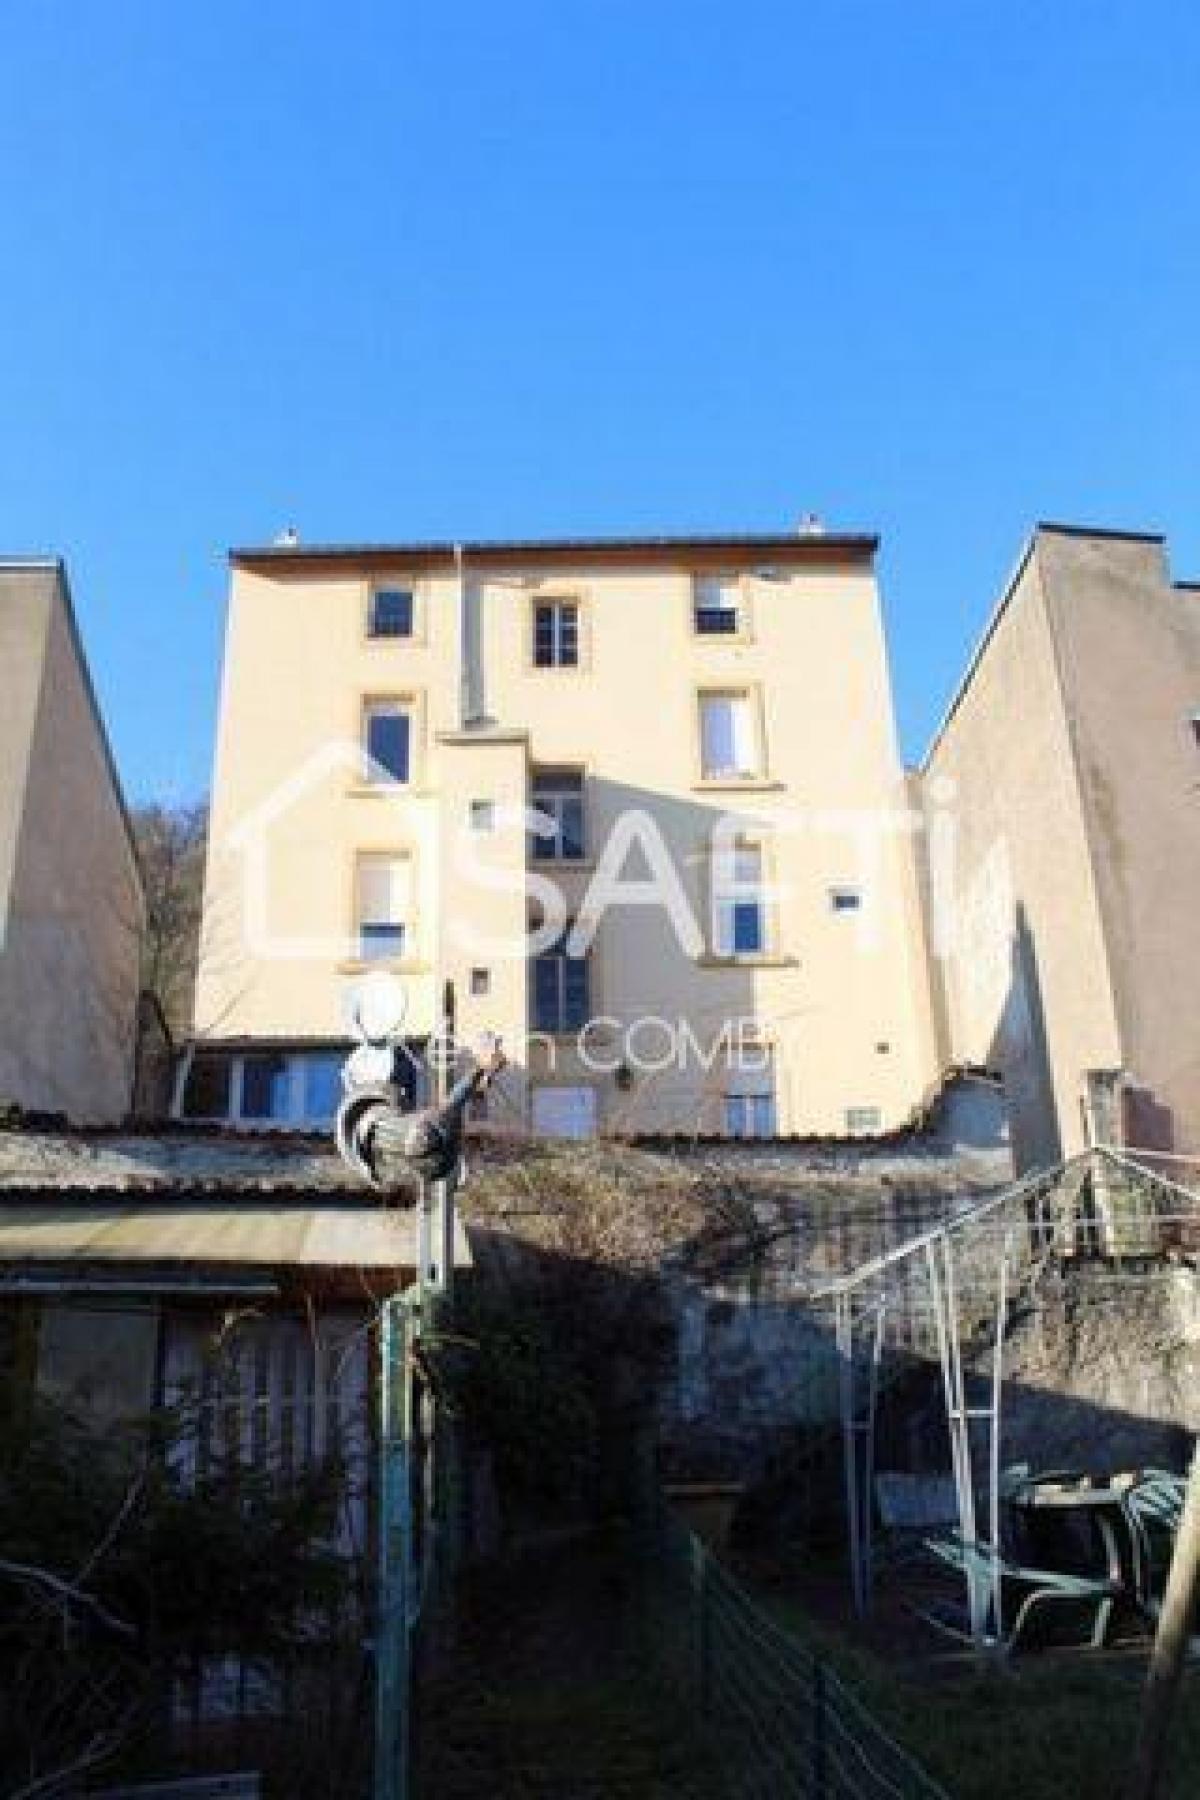 Picture of Apartment For Sale in Algrange, Lorraine, France